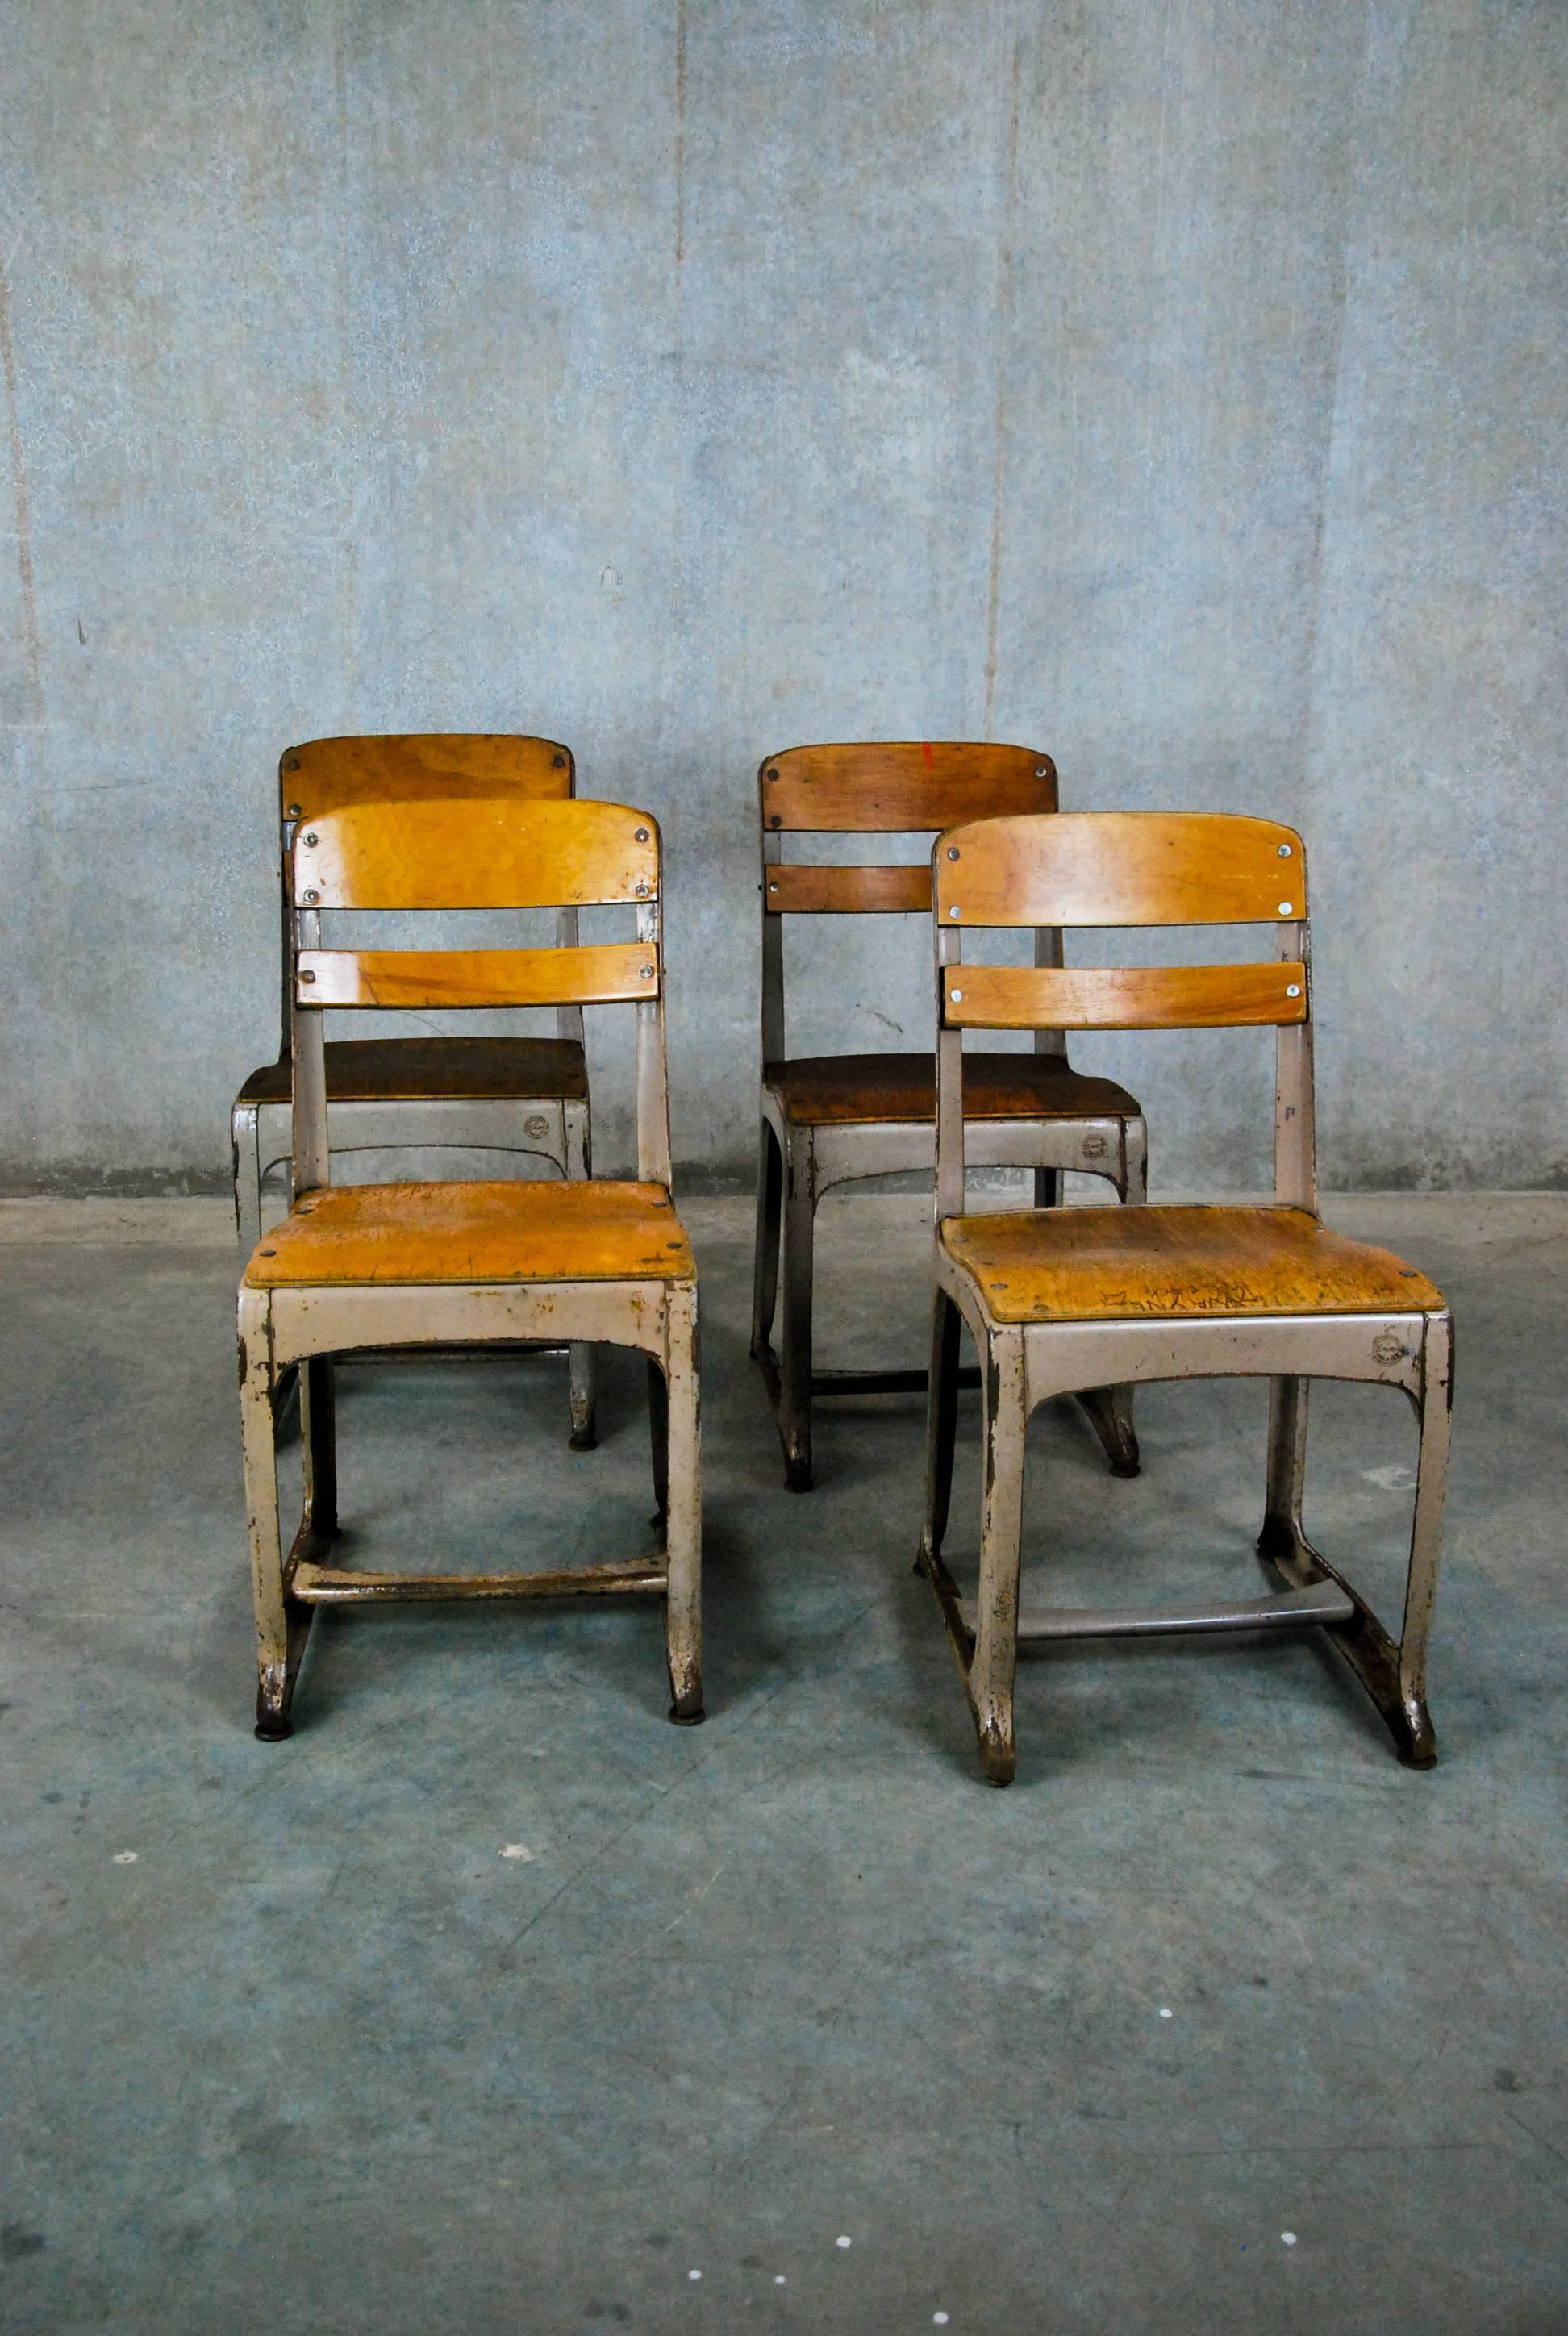 1920
American seating company of Grand Rapids, Michigan, model 368, ergonomic envoy classroom chairs , made of pressed steel with molded plywood seats and backs - complete with adjusting lower rail and leveling feet.
 Sturdy and extremely